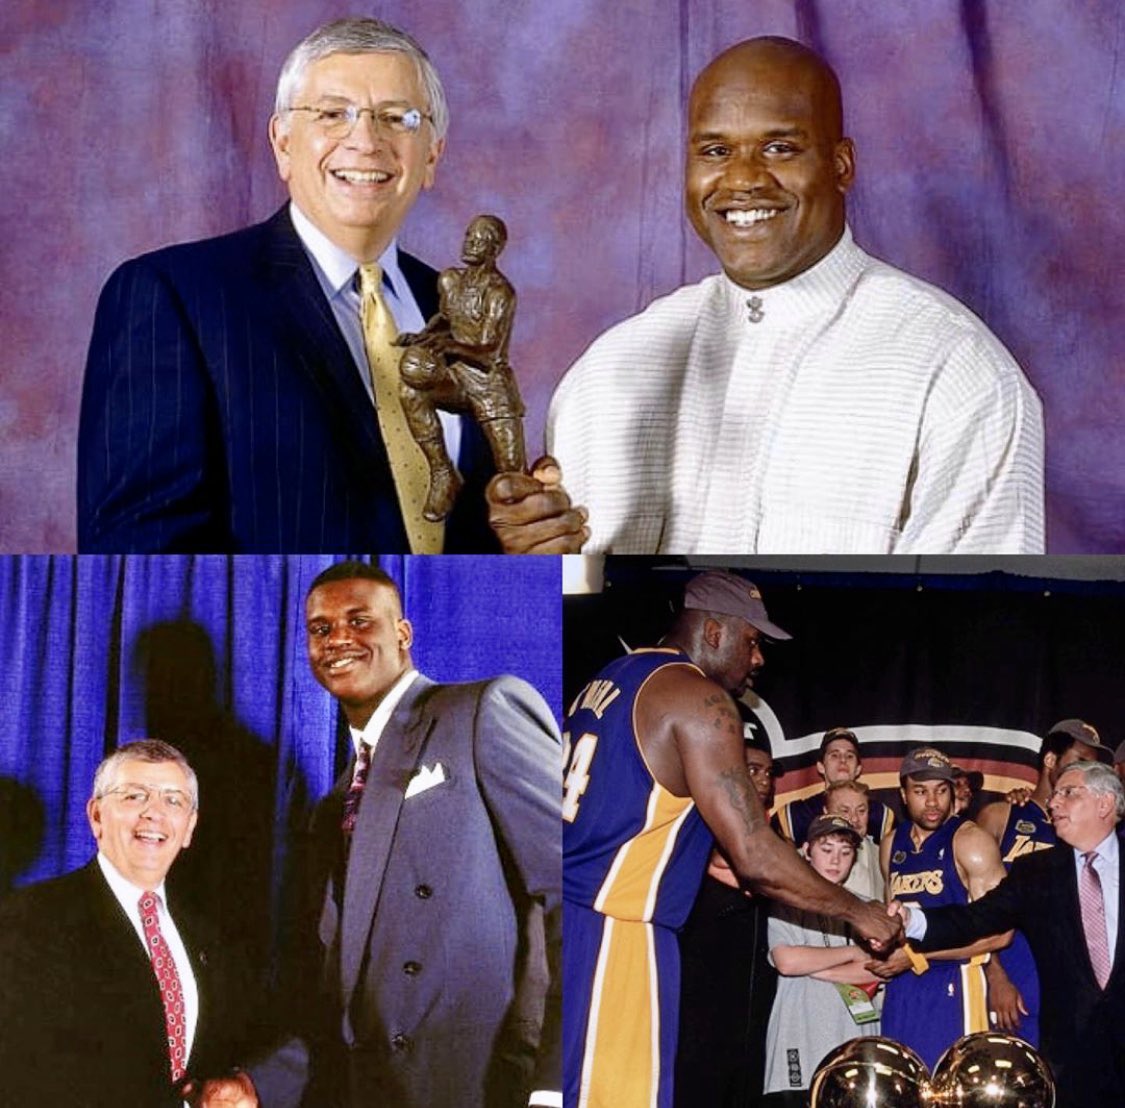 RIP  Mr David Stern
The best commissioner to ever do it. 